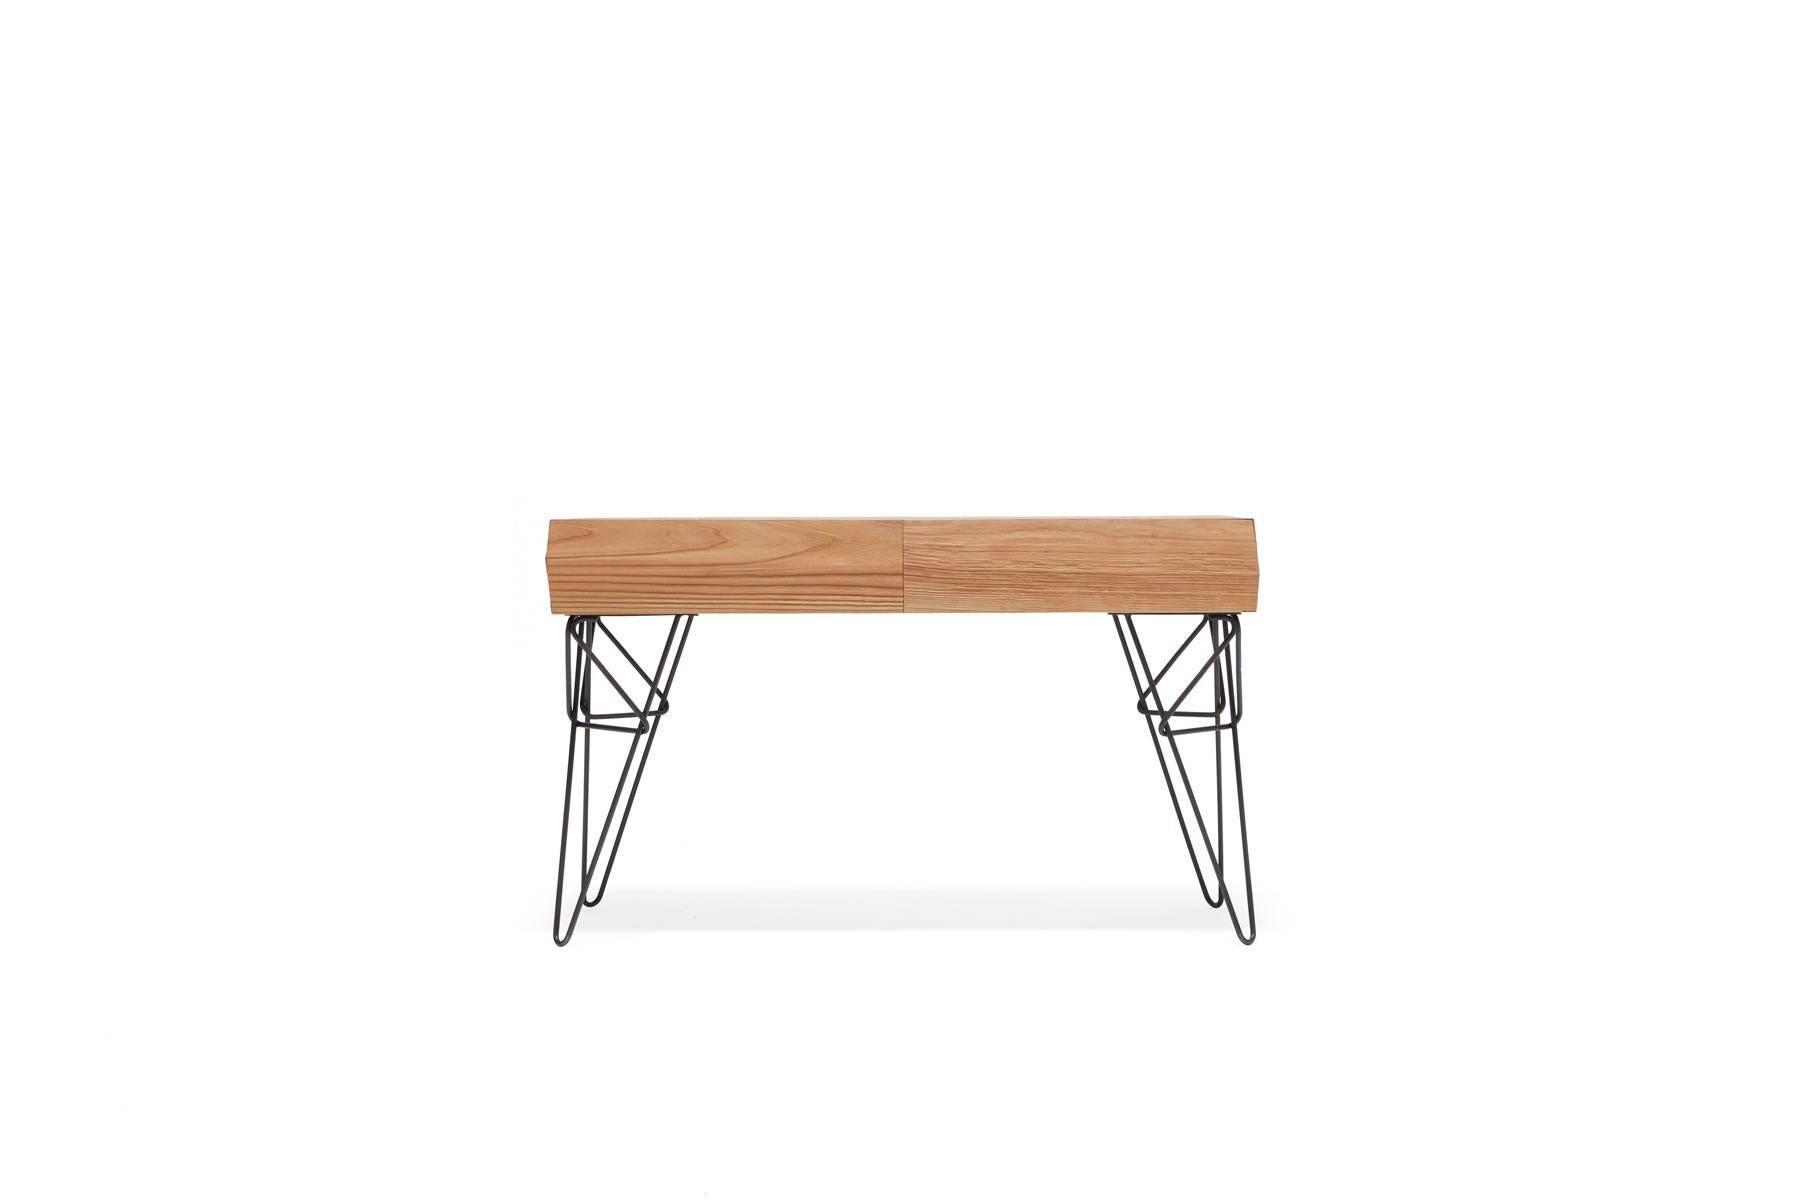 Sandblasted alder wood to simulate the effect that water and sand have on driftwood, paired with black hairpin legs in a unique design. The table has two hidden drawers to allow for out-of-sight storage.

 